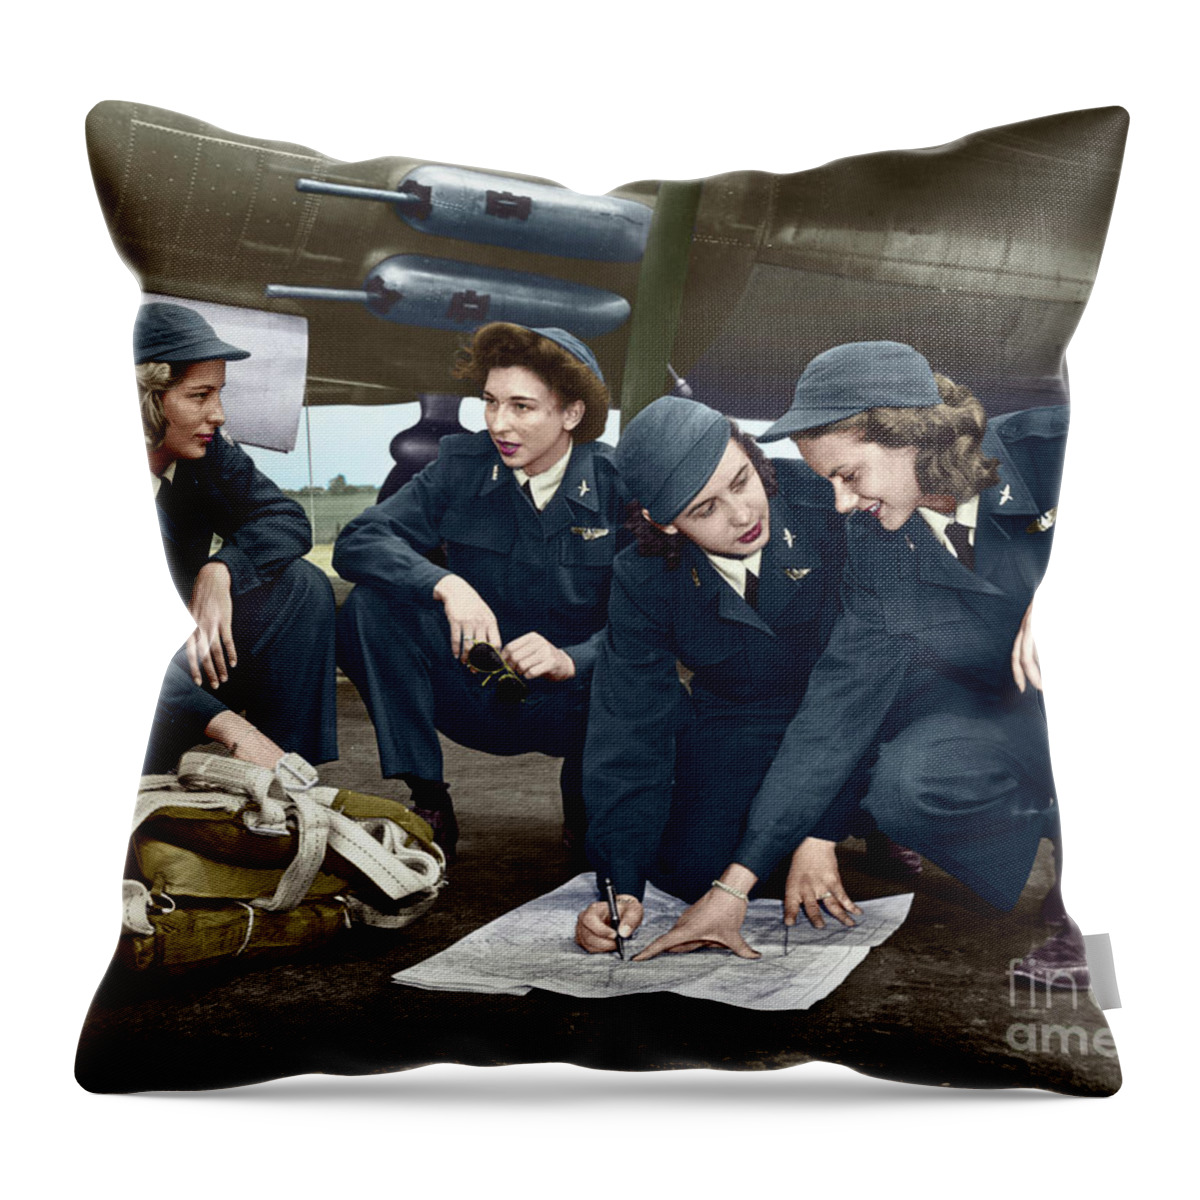 1941 Throw Pillow featuring the photograph Wwii Female Pilots by Granger